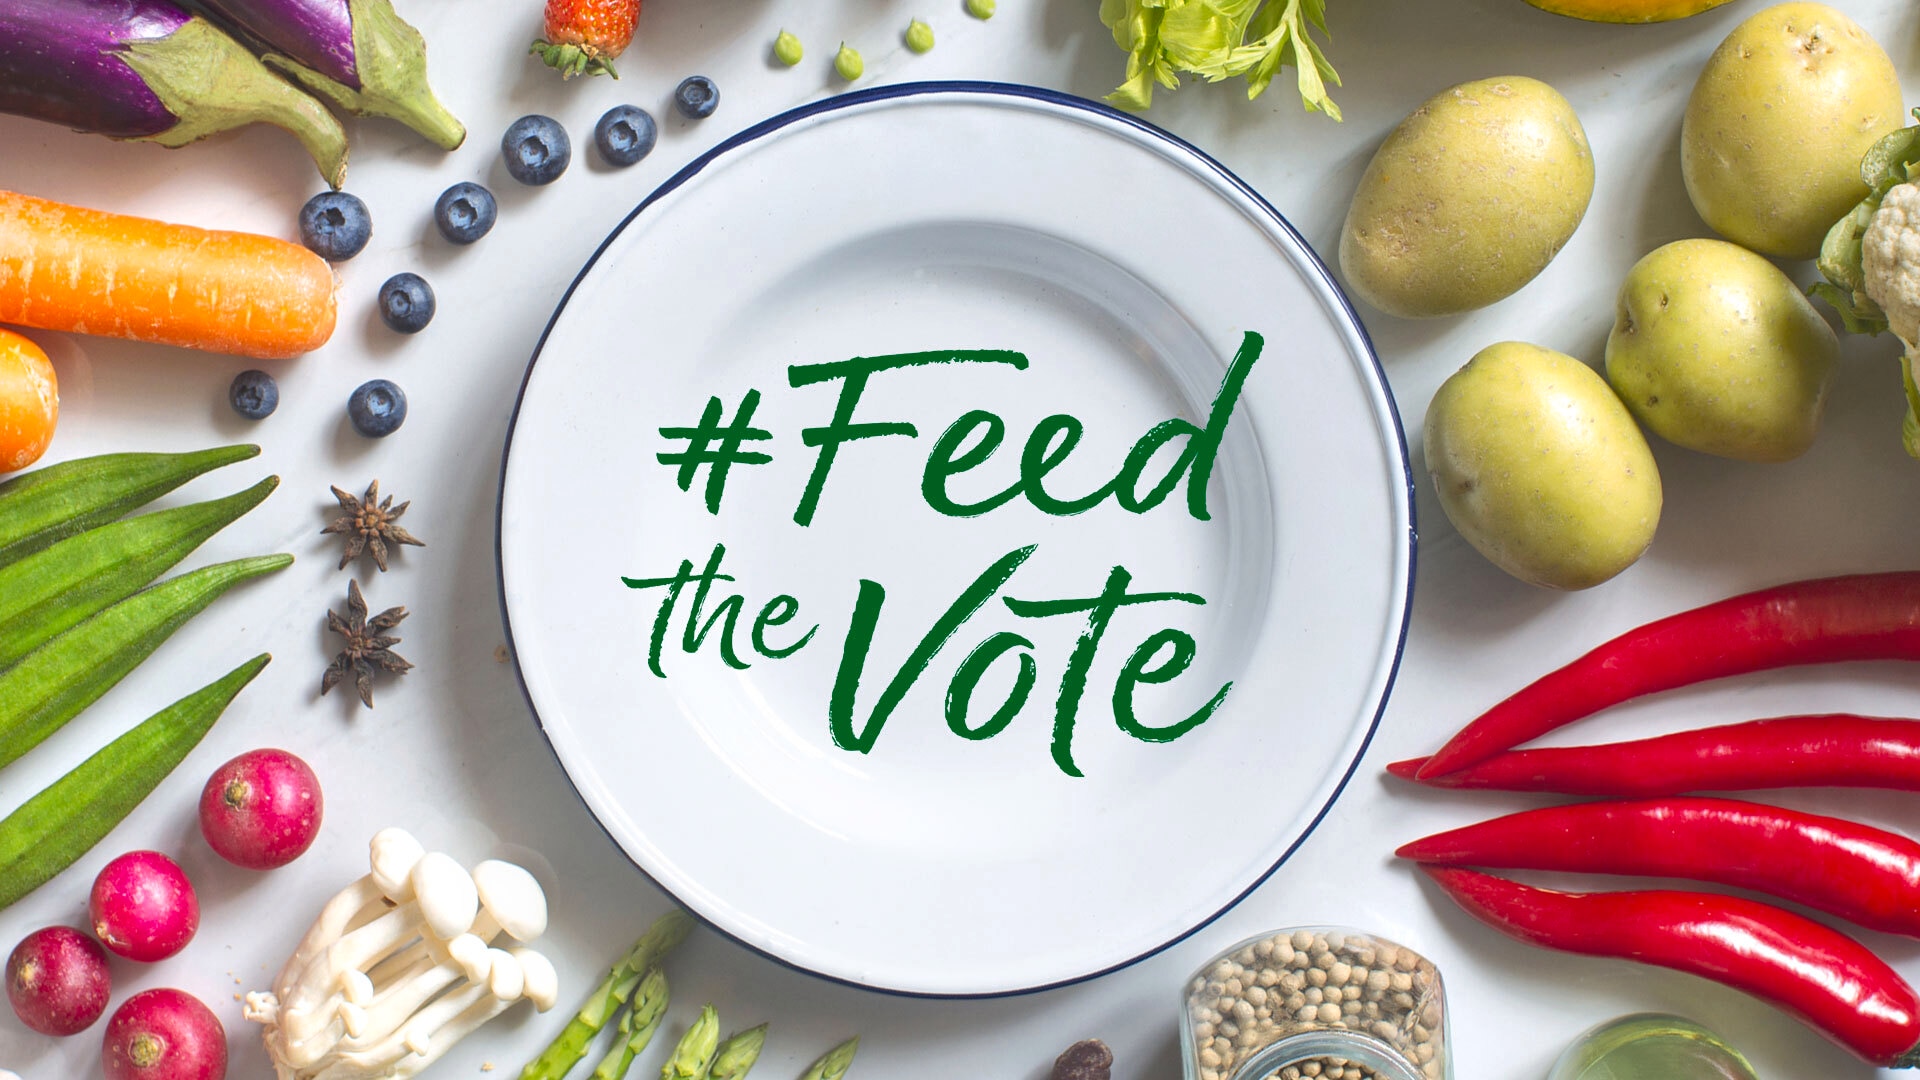 Feed the Vote